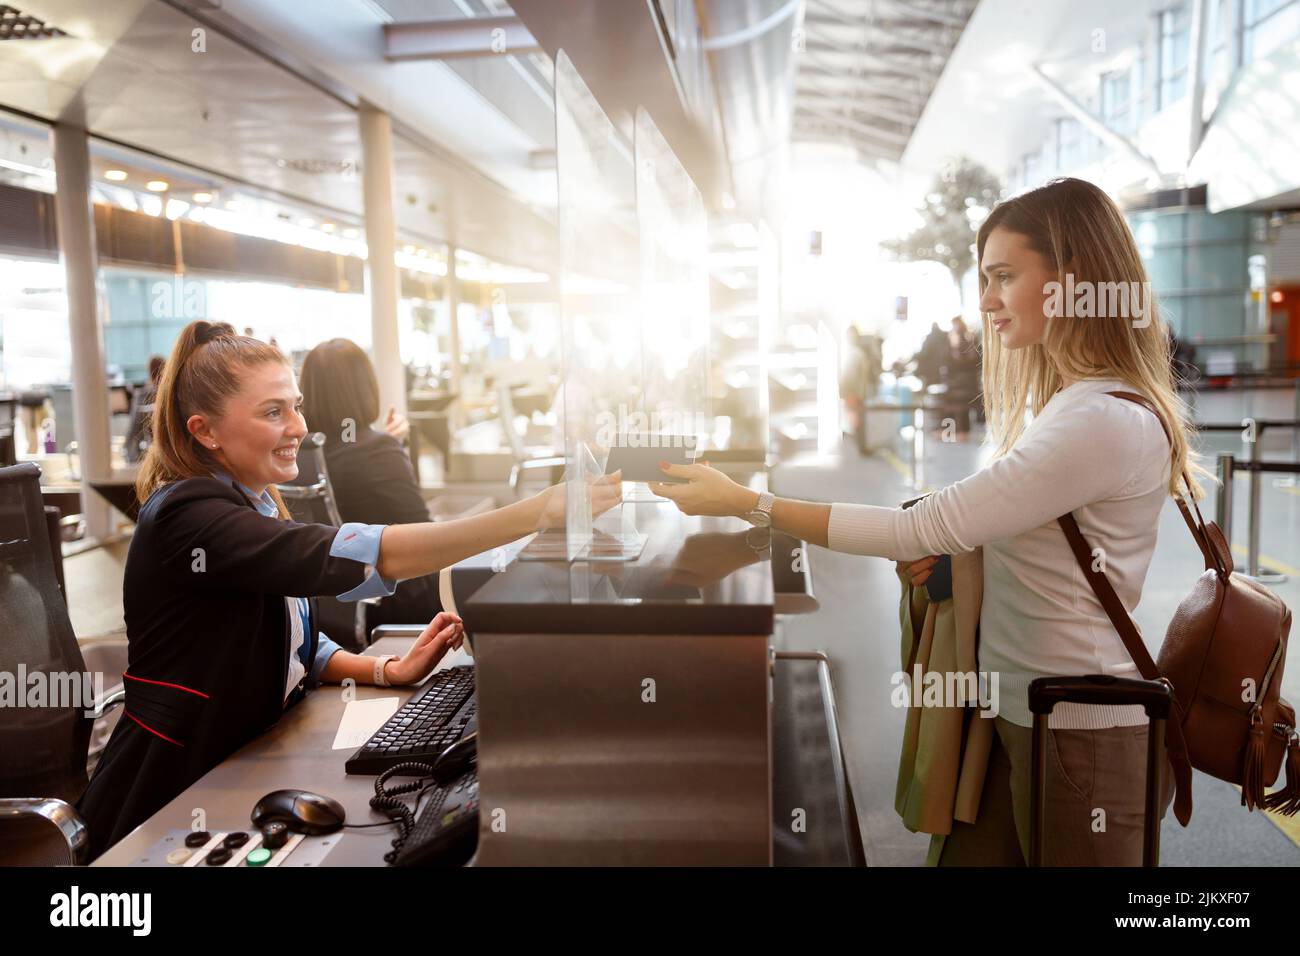 Female traveler giving her passport to an airport staff member Stock Photo